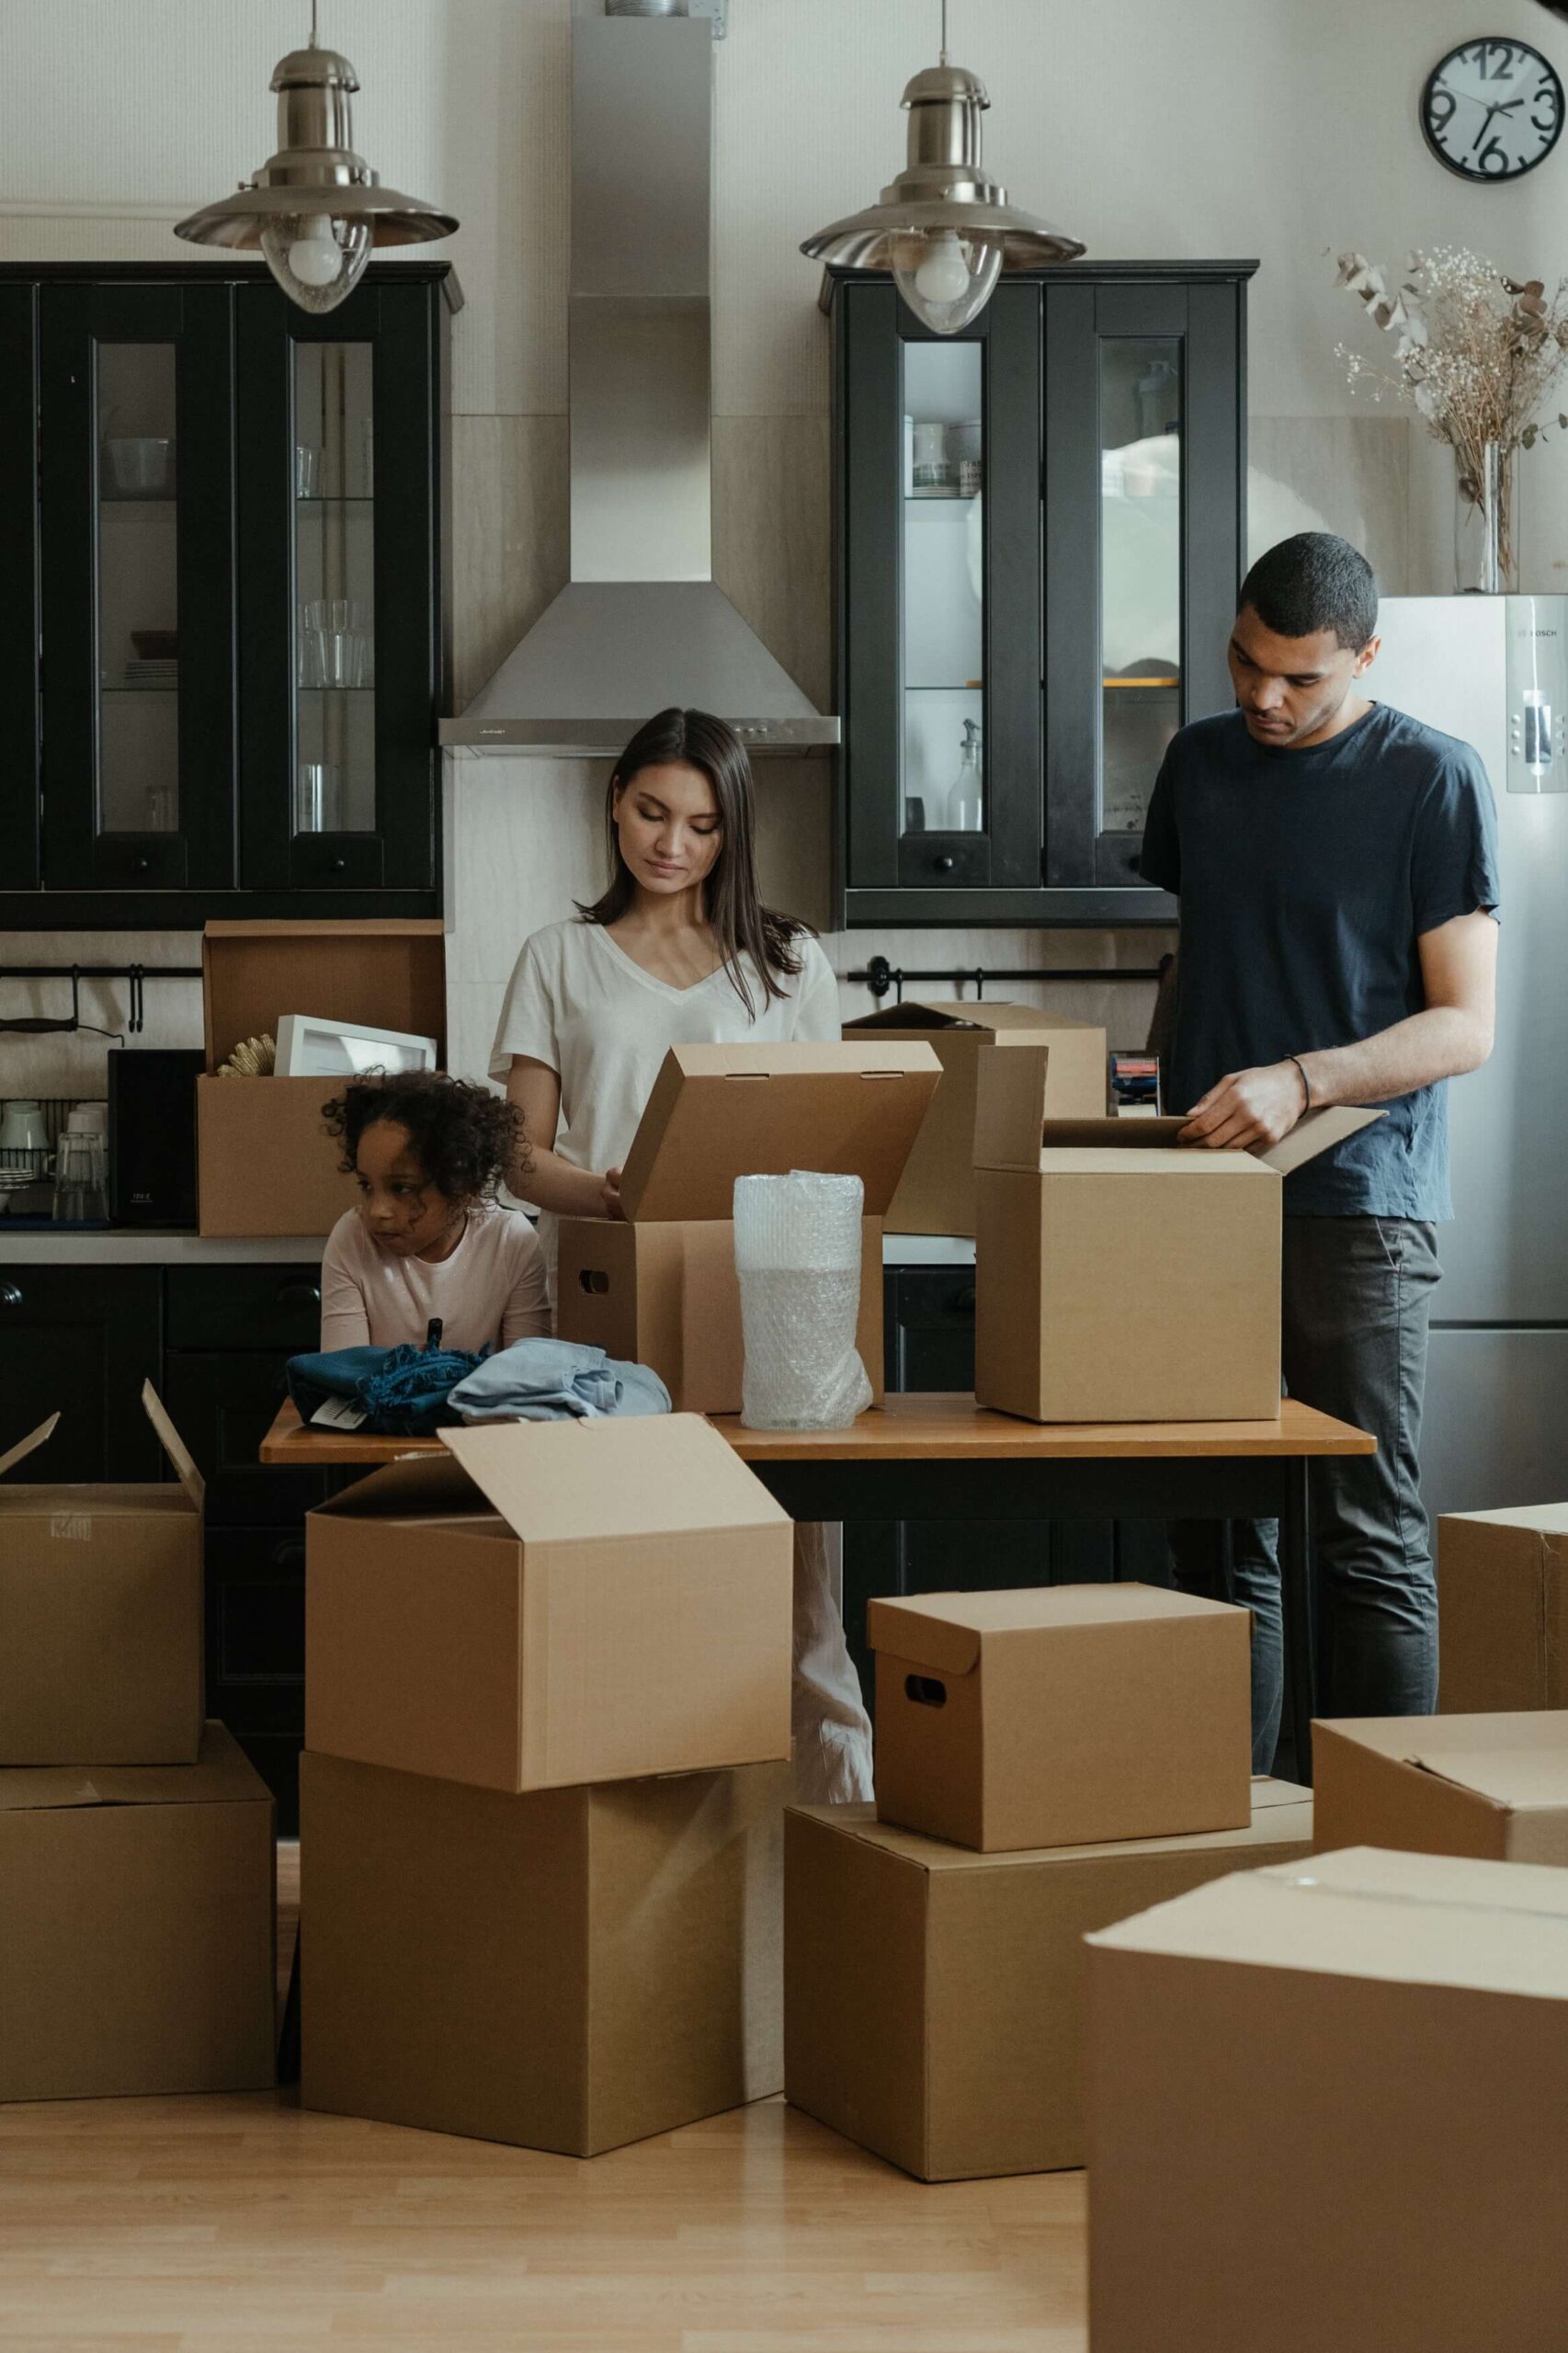 5 Crucial Things You Should Do When Moving Into a New Home